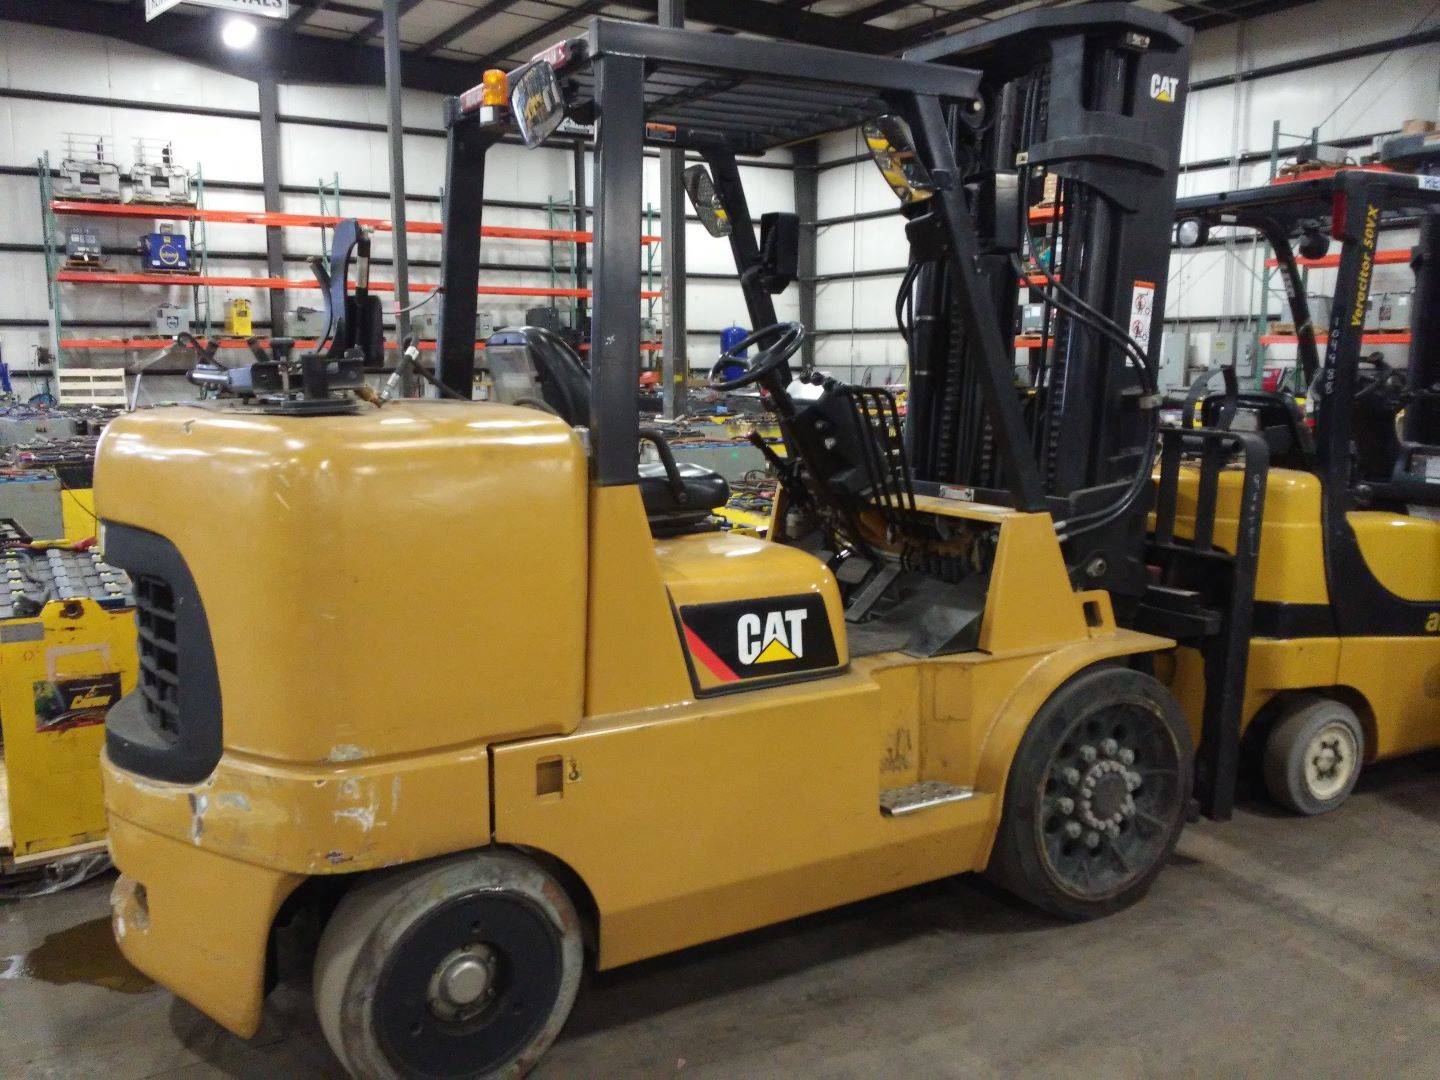 Battery Incl 2010 Cat Electric 4 Wheel E3500 Forklift 3 stage mast 